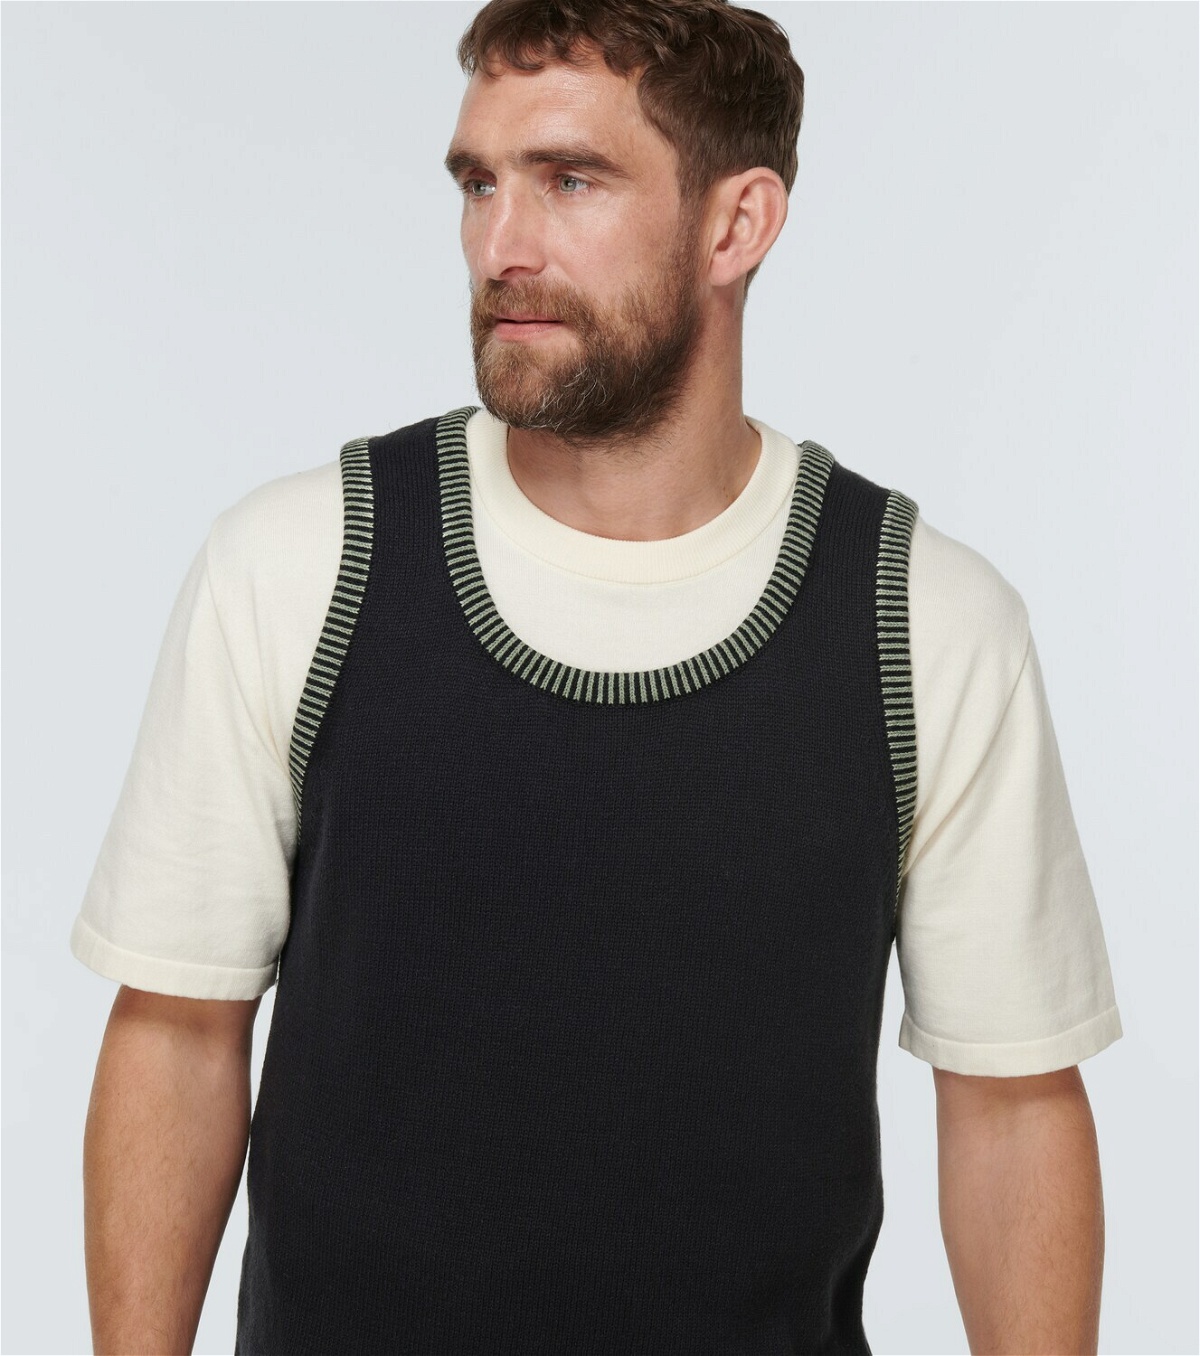 Commas Sleeveless knitted top